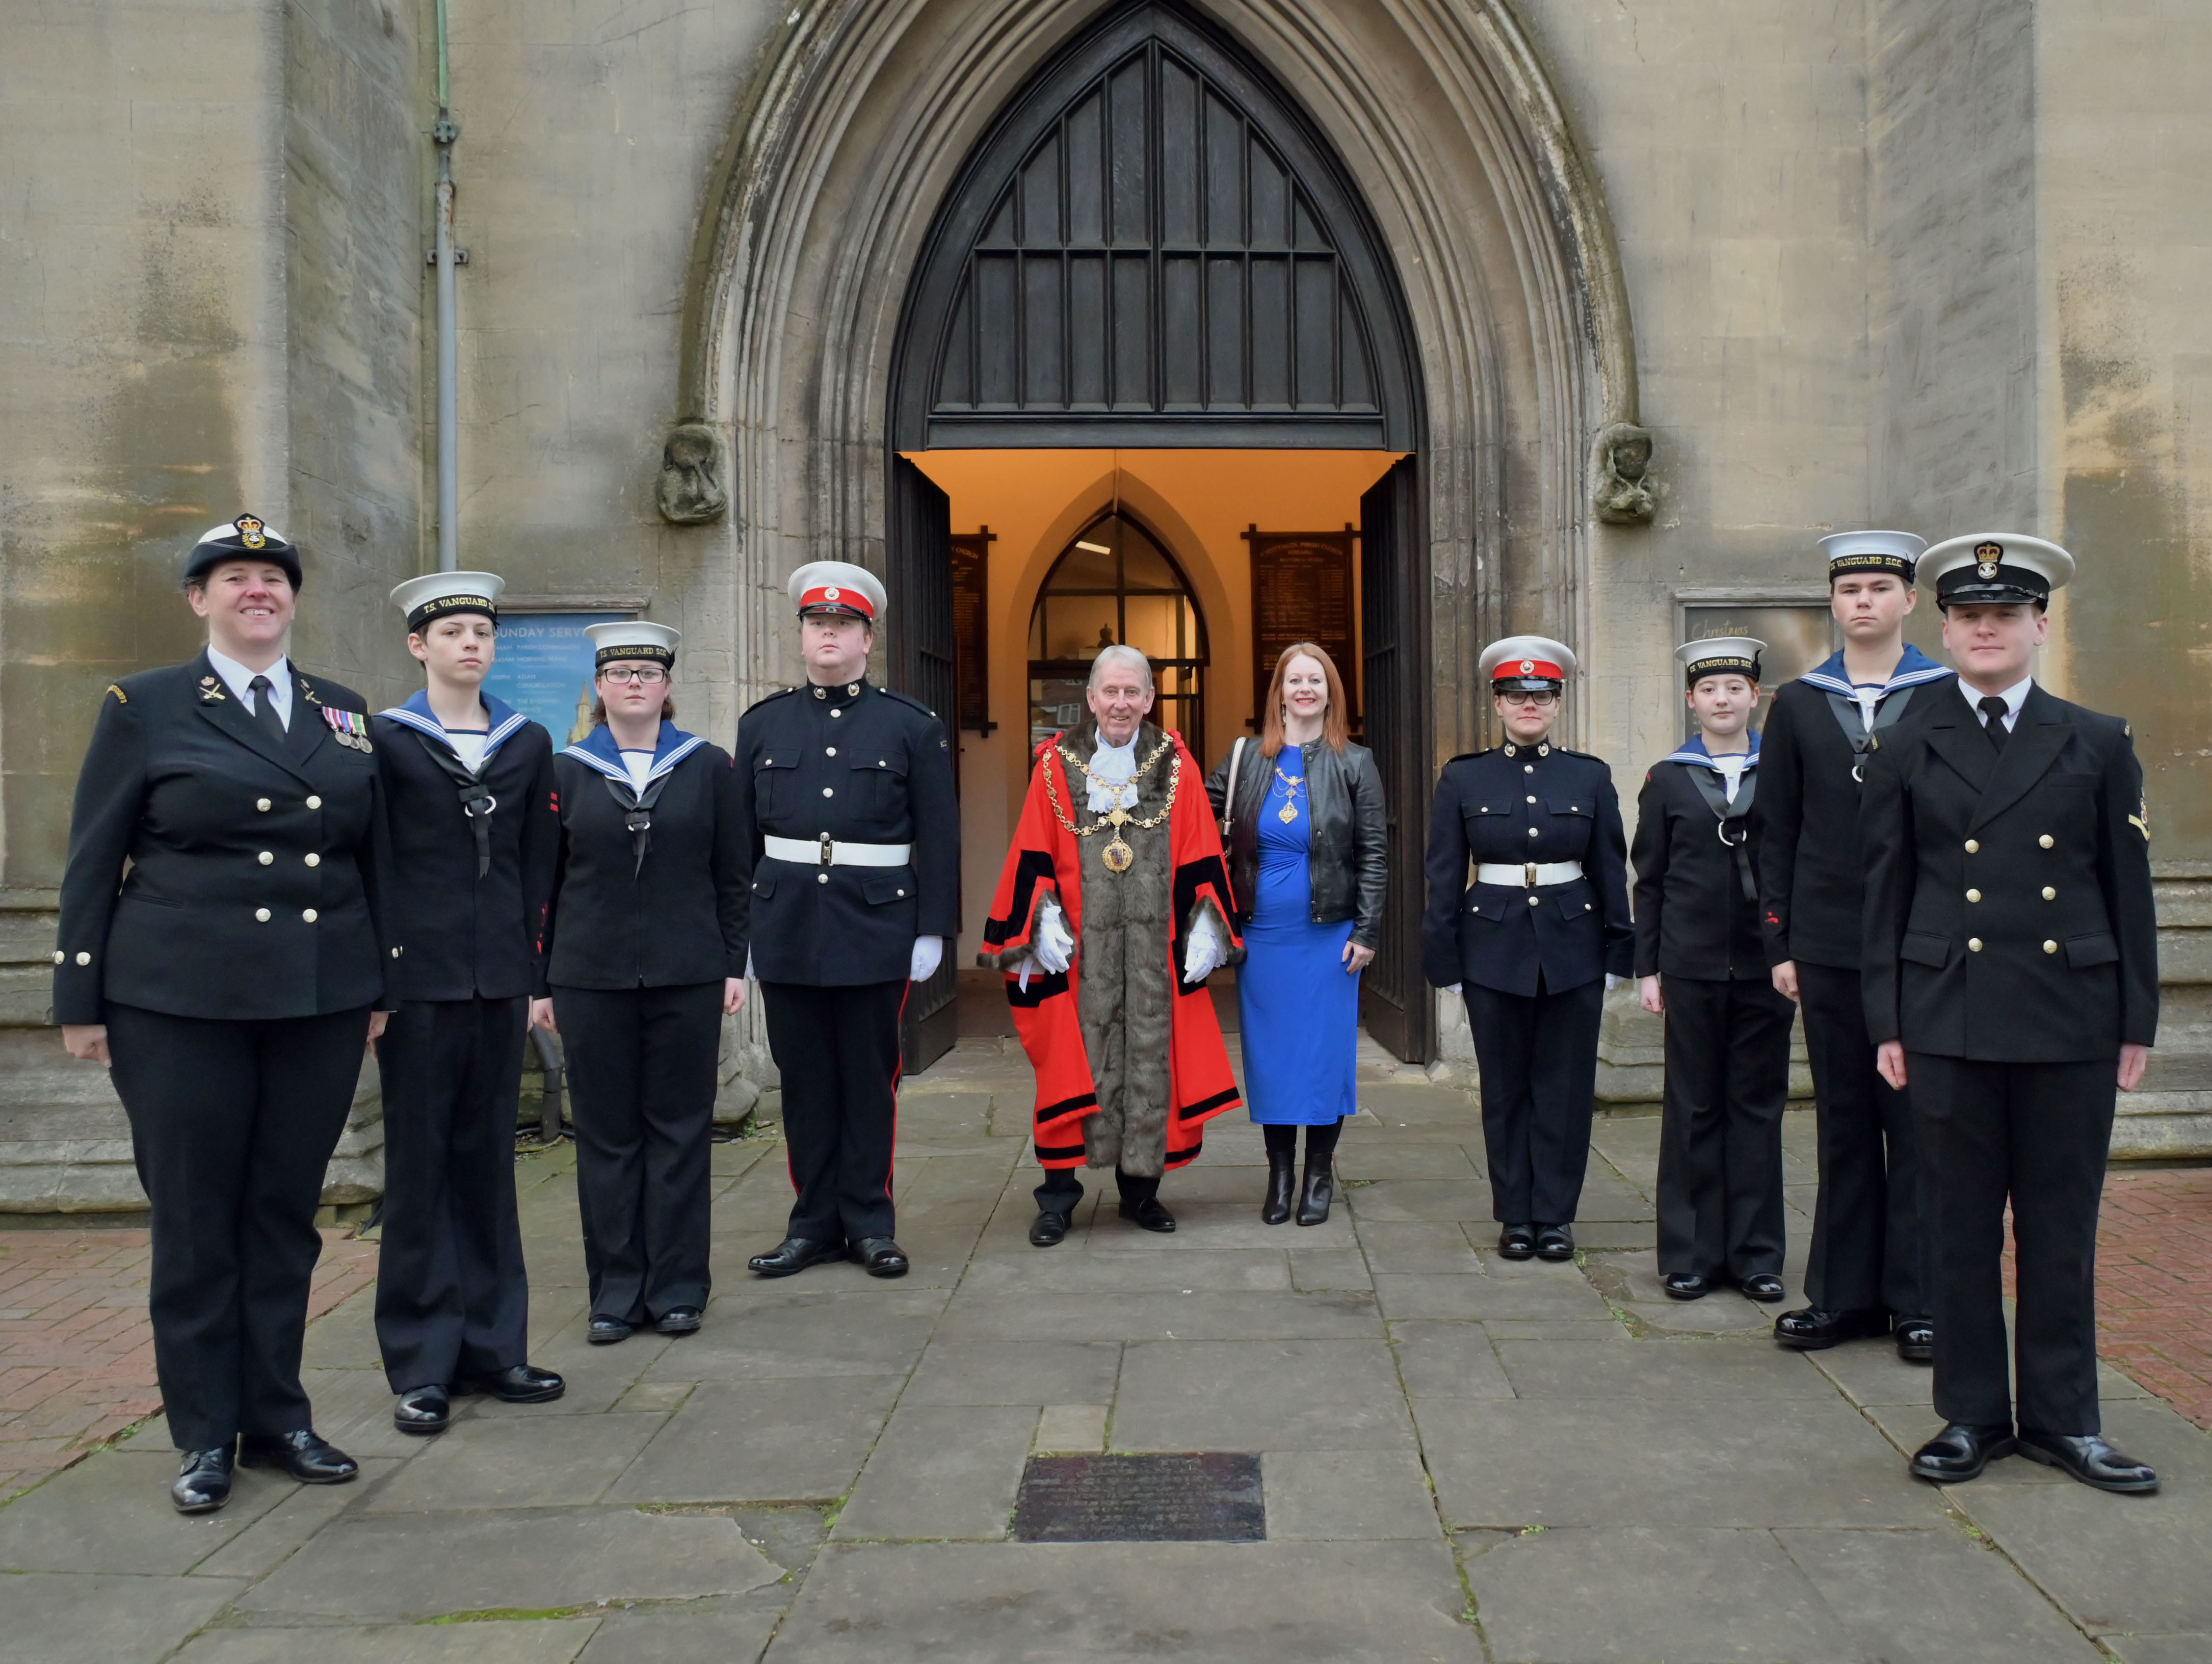 The mayor of walsall in red mayoral robes, next to the mayoress in a royal blue dress, stand smiling in the middle of a group of marine cadets in black uniforms outside a church entrance.